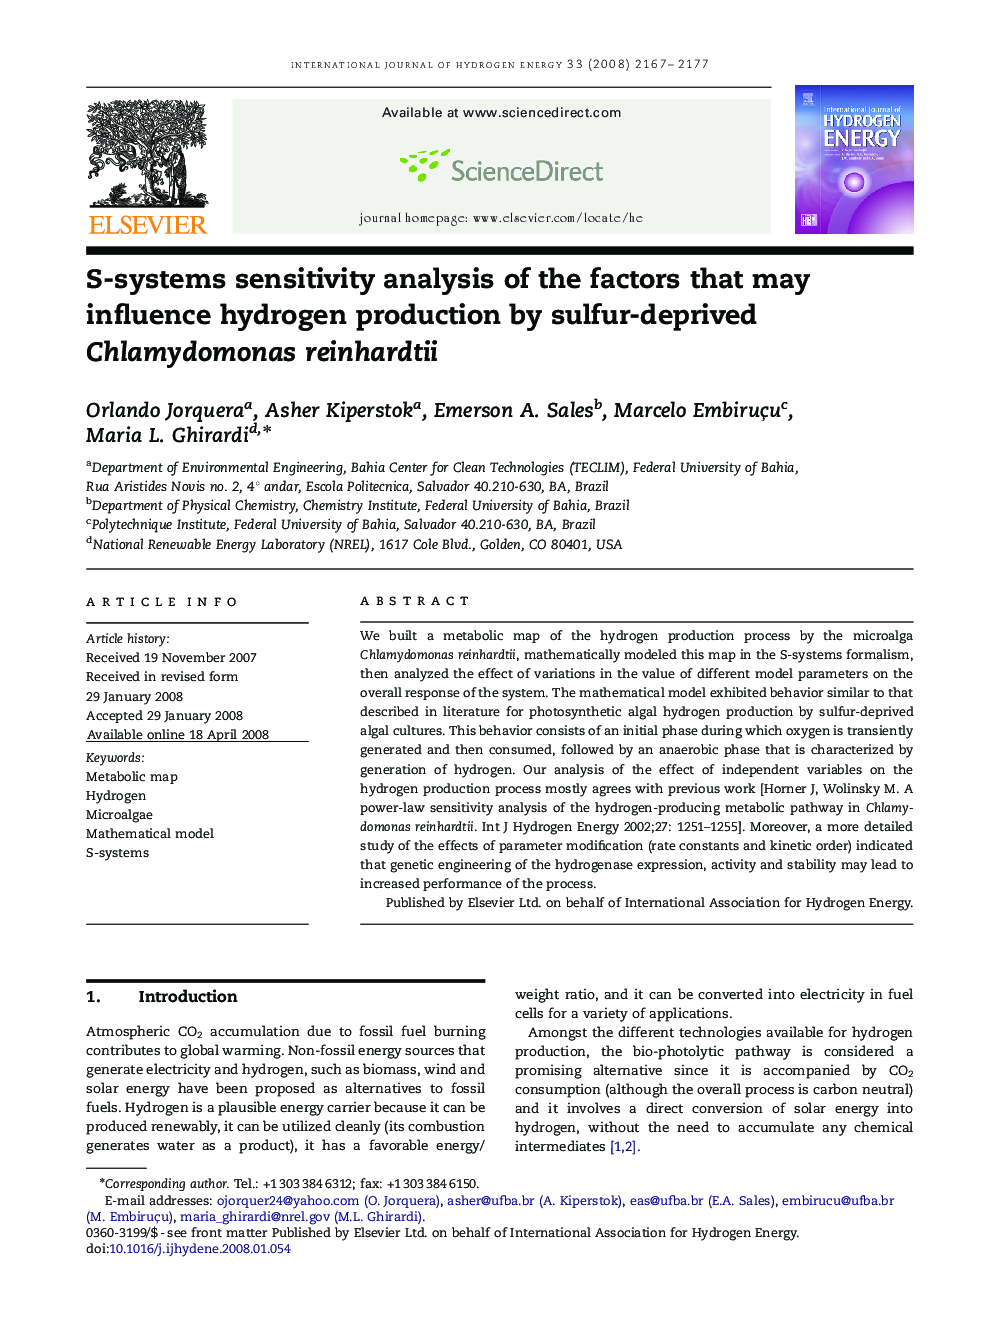 S-systems sensitivity analysis of the factors that may influence hydrogen production by sulfur-deprived Chlamydomonas reinhardtii